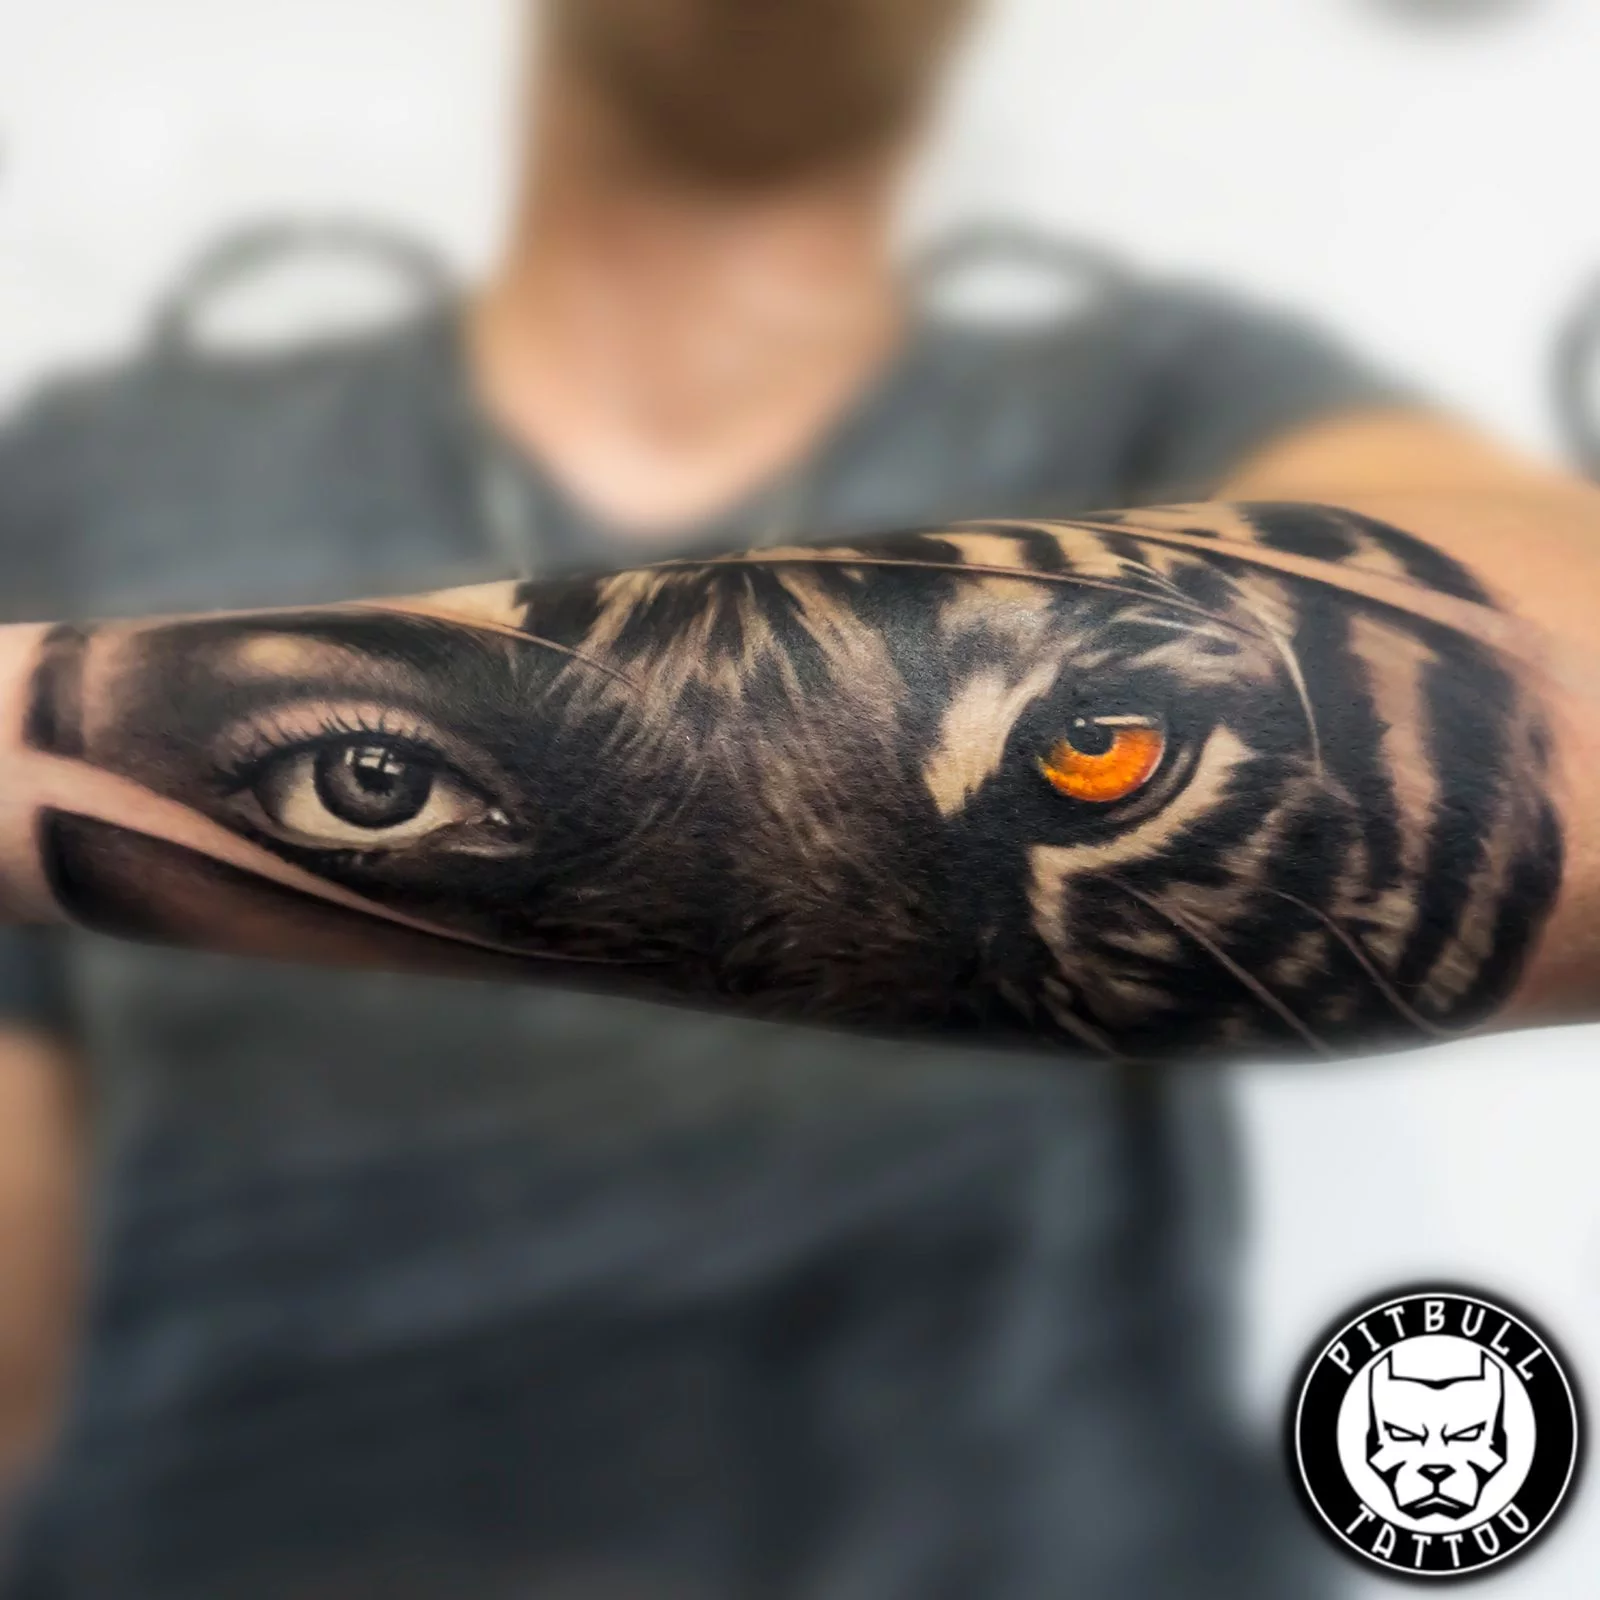 Top 10 tattoo styles that you need to know